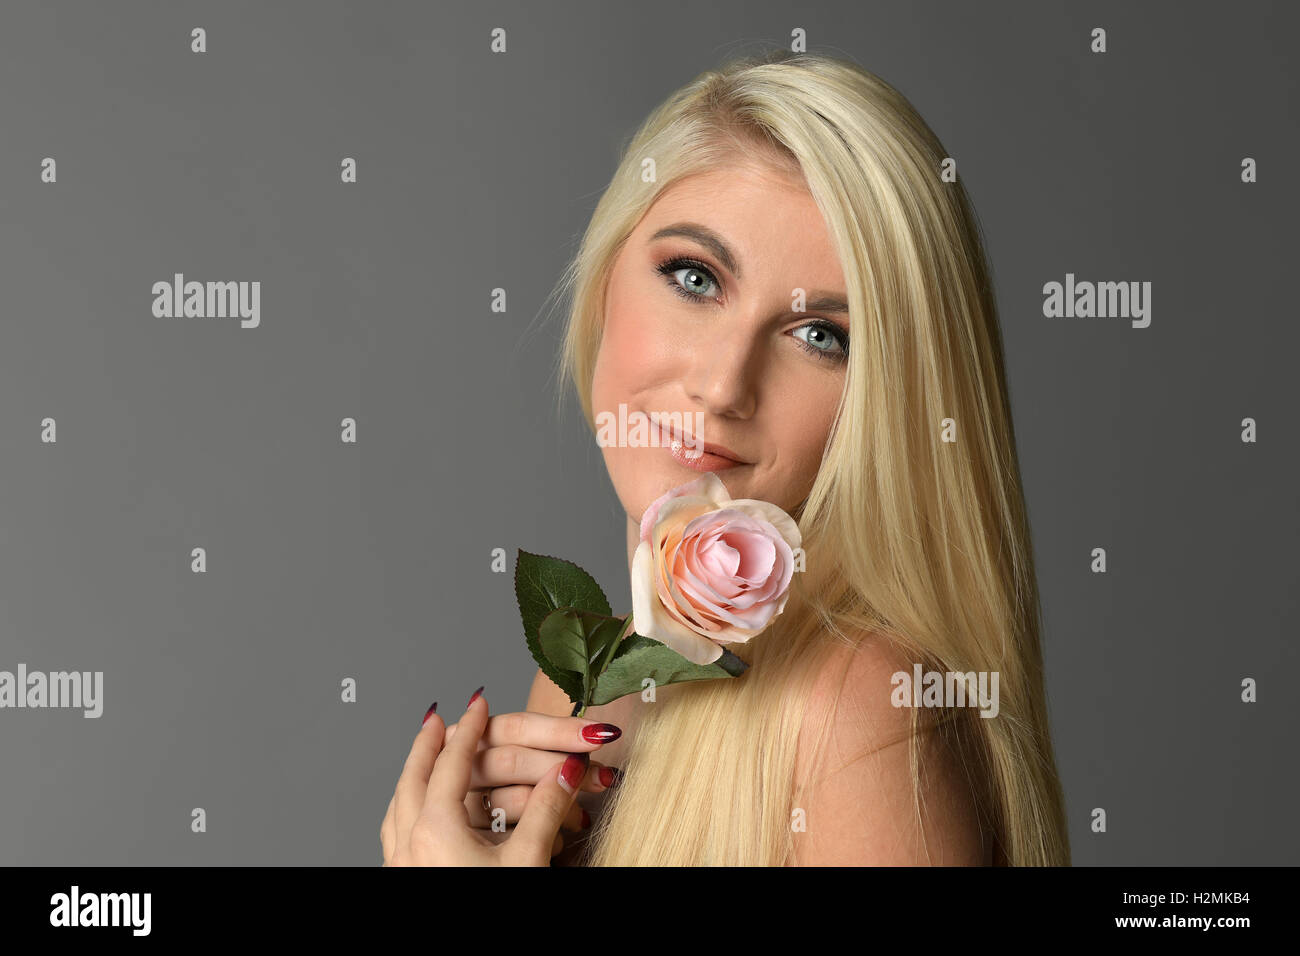 Portrait of young woman holding pink rose isolated over gray background Stock Photo